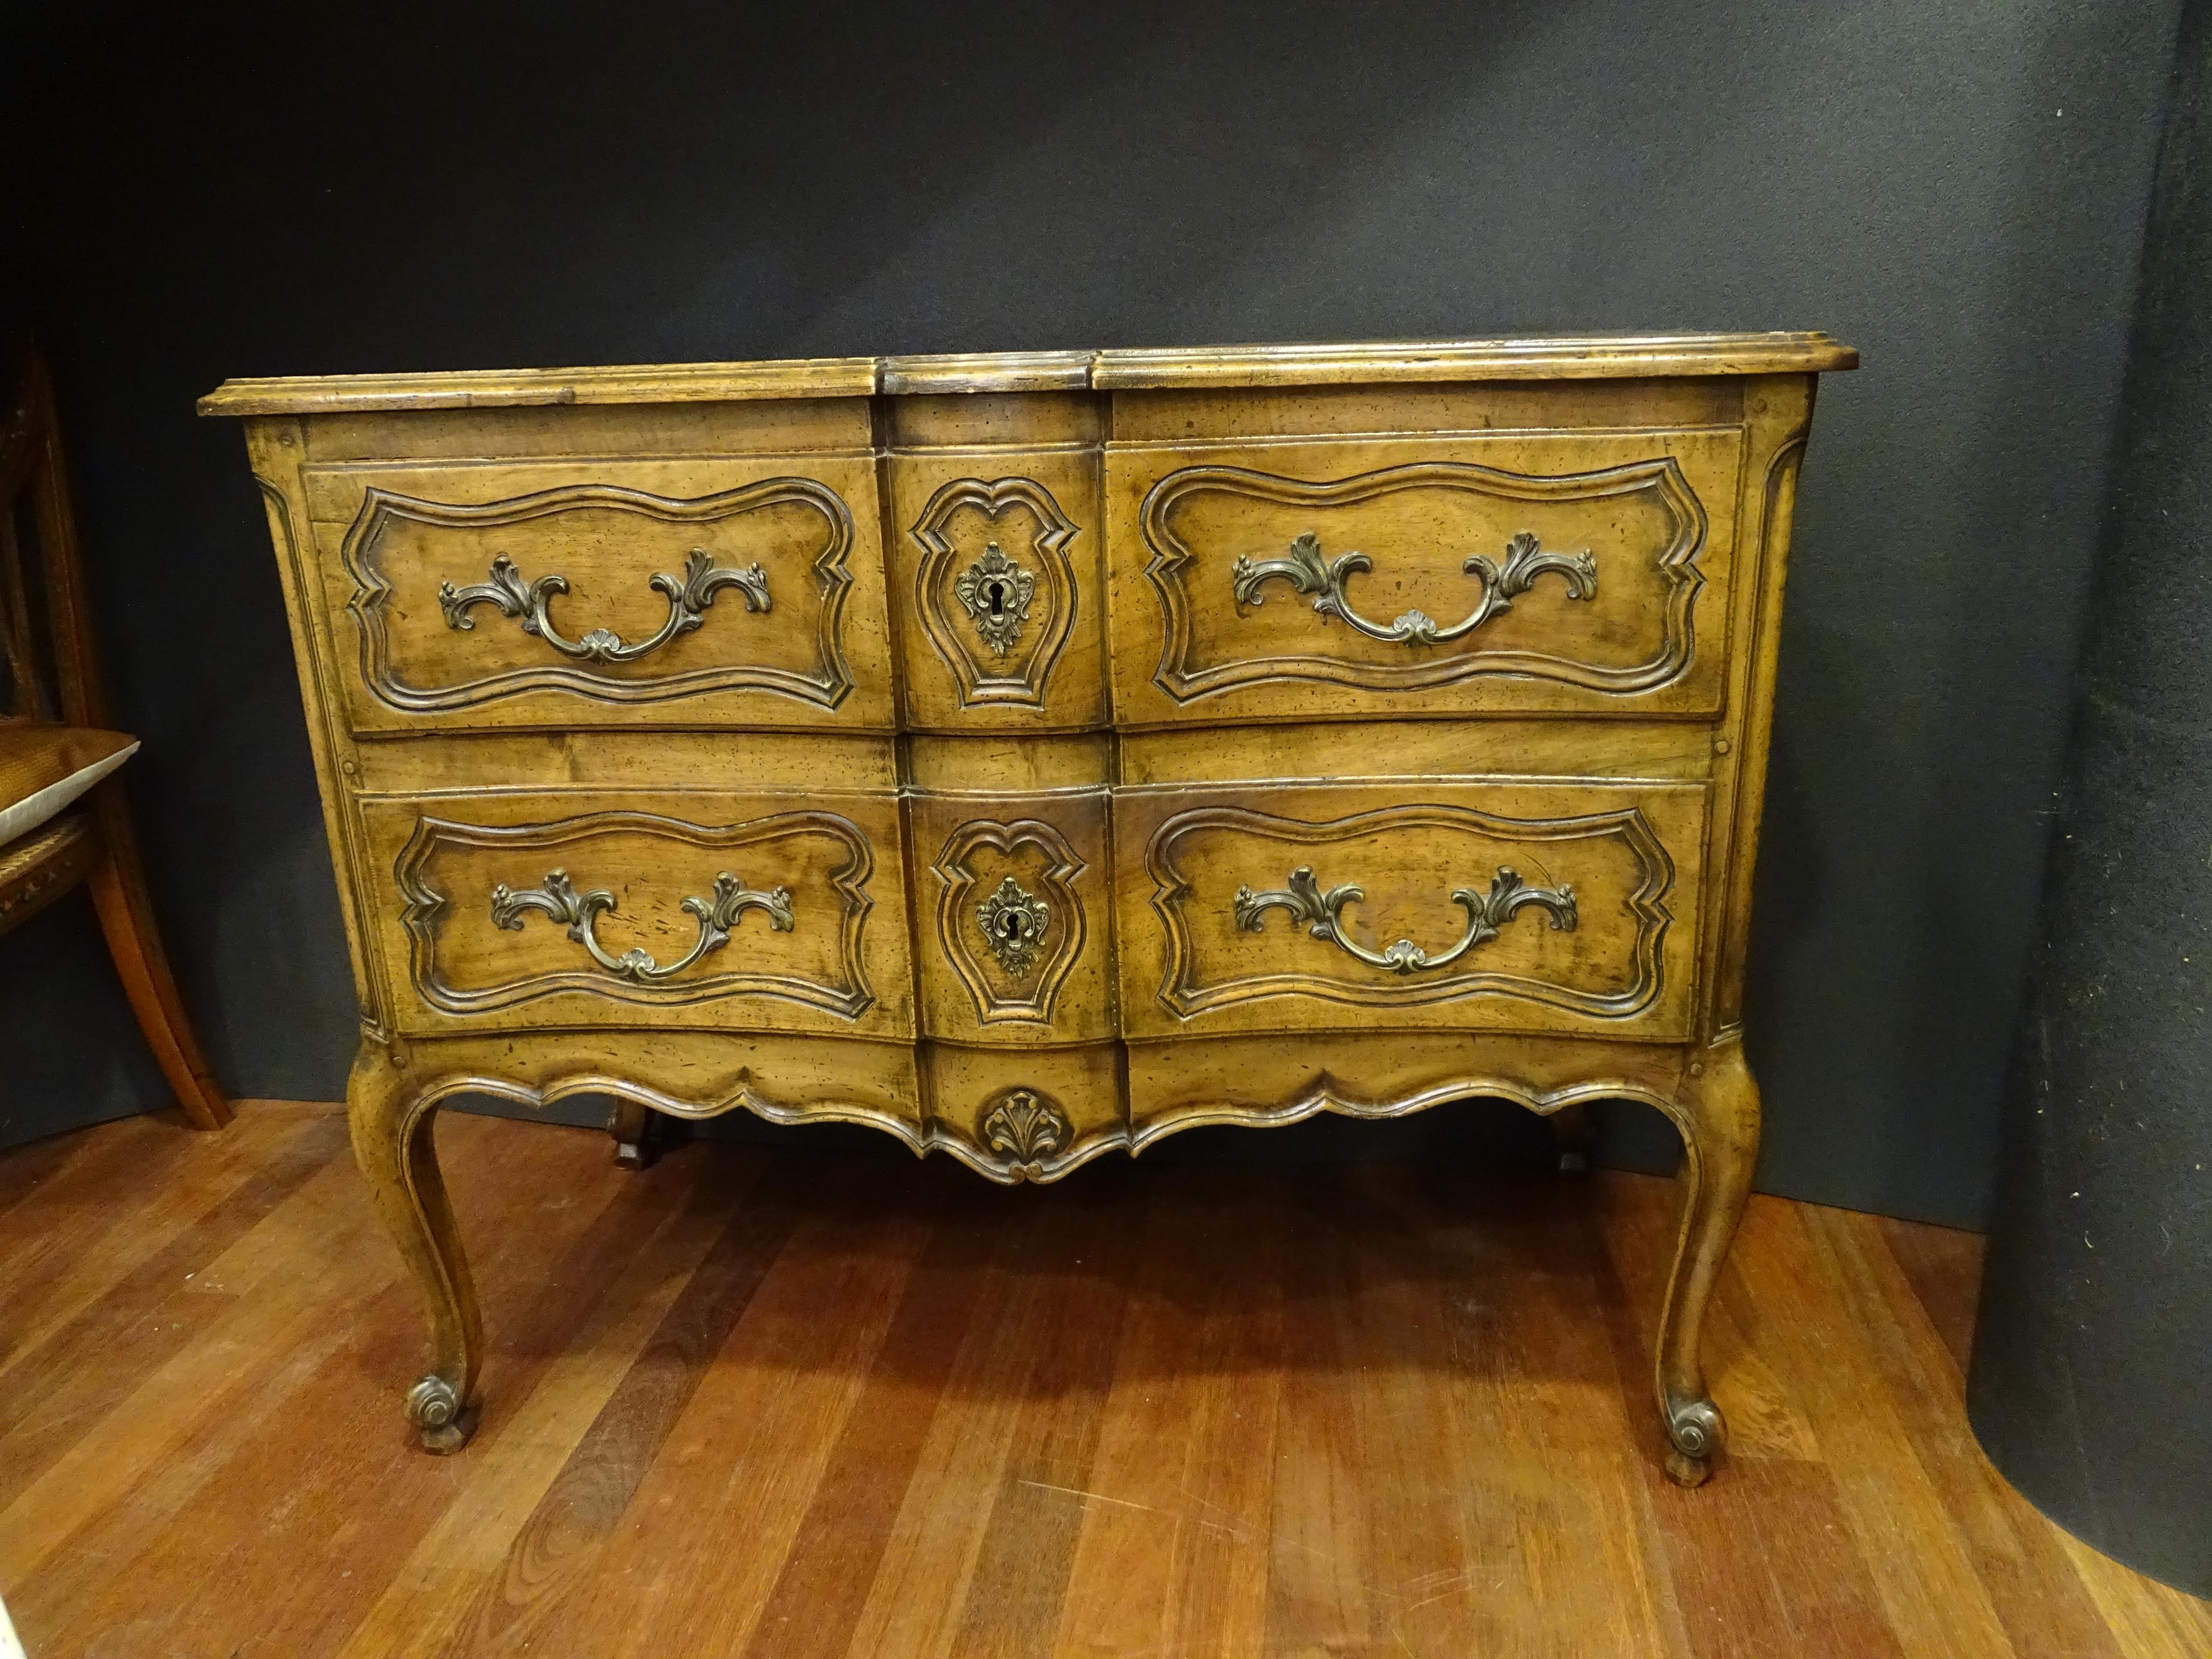 Gorgeous Lyonnaise commode or chest of drawers, 18th century , made of an extraordinary solid walnut wood with gilded bronze trim. Acquired in a private French collection.
It's called 